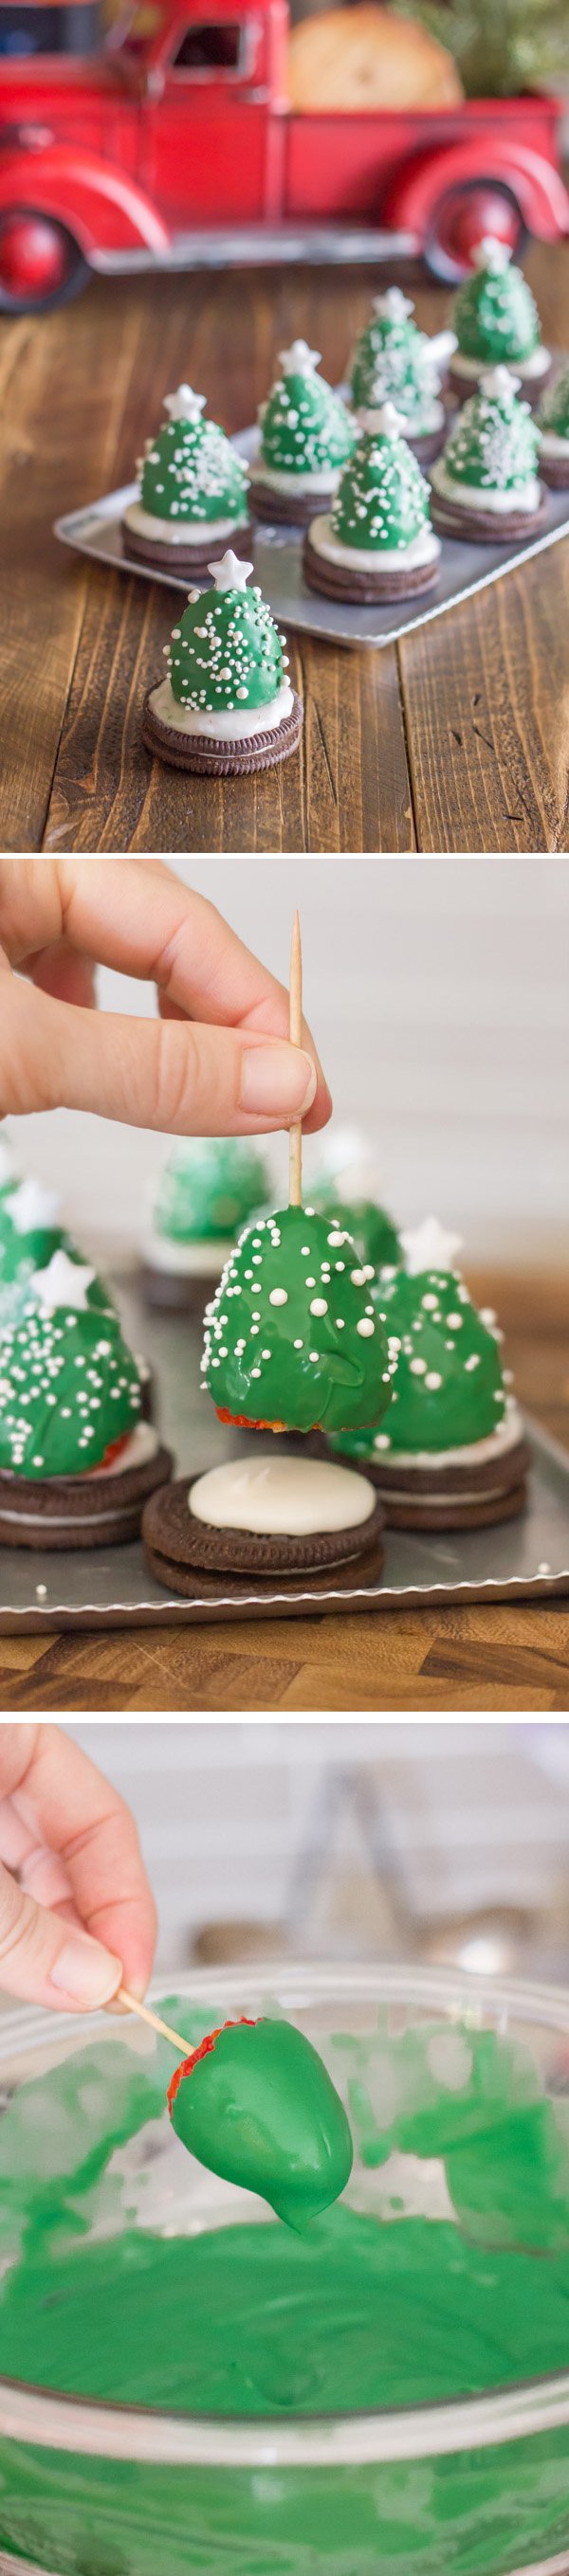 chocolate-covered-strawberry-christmas-trees-food